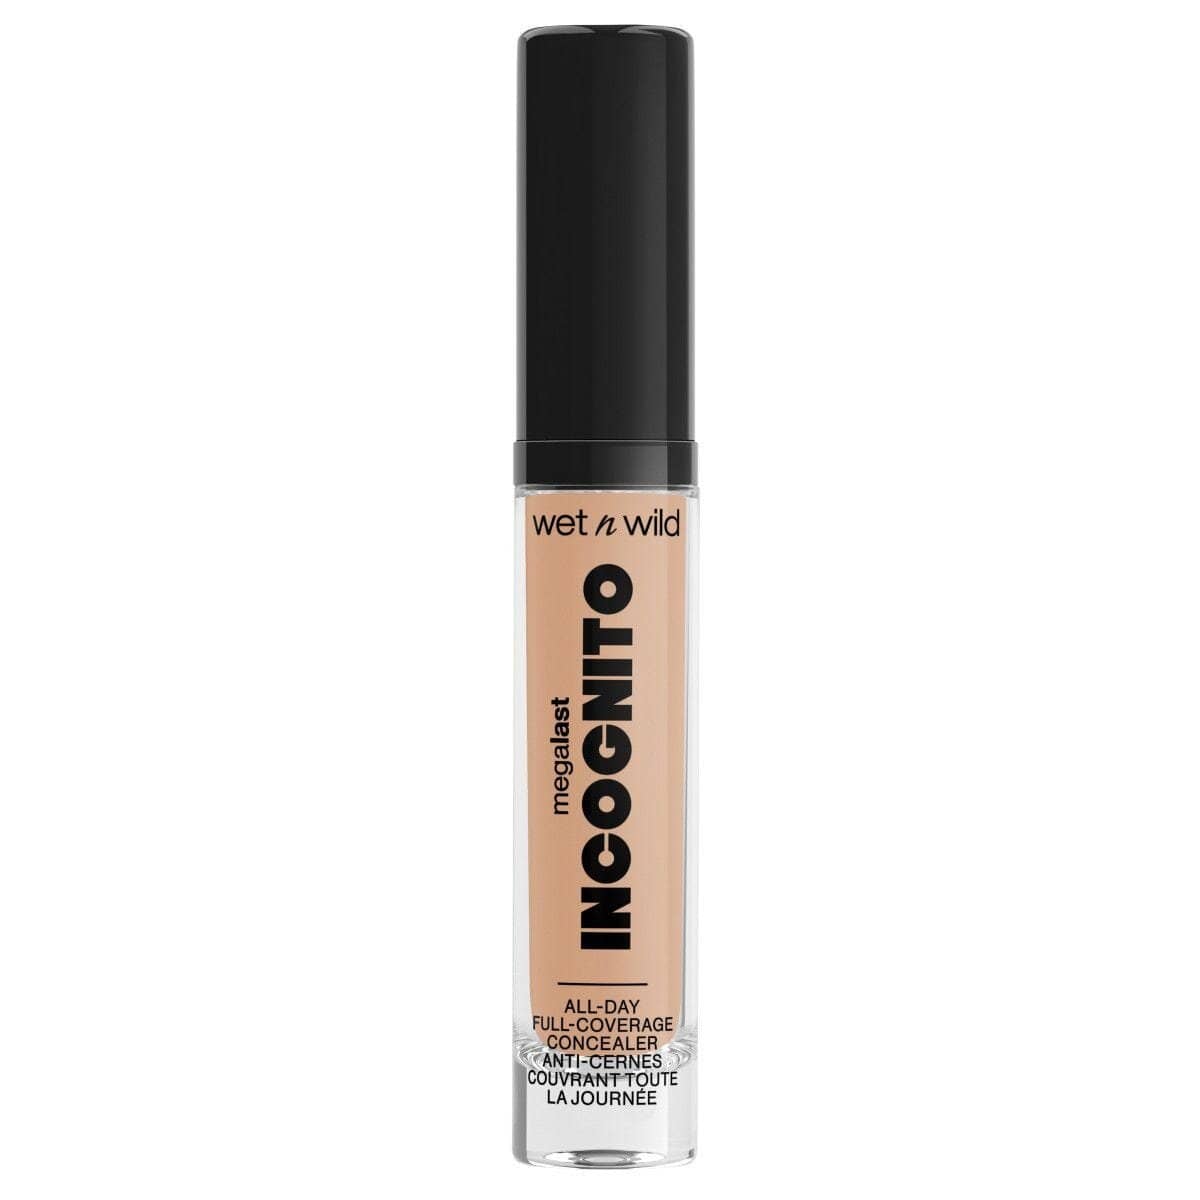 MEGALAST INCOGNITO FULL COVERAGE CONCEALER MEDIUM NEUTRAL - WET N WILD